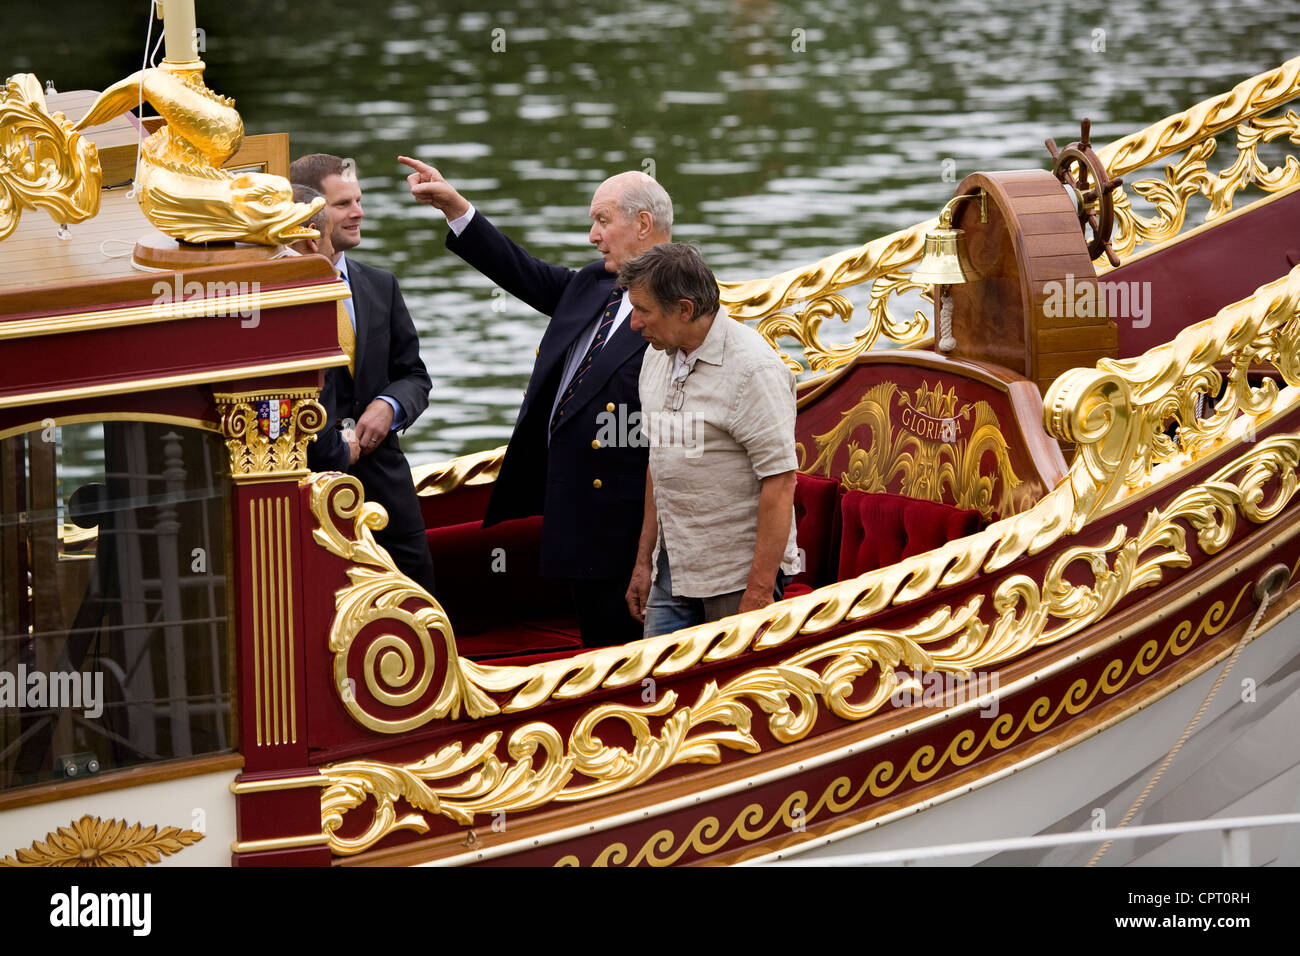 Lord Sterling of Plaistow (left) & boatbuilder Mark Edwards (right) looking over the Queen's Royal Barge 'Gloriana'. Richmond UK Stock Photo